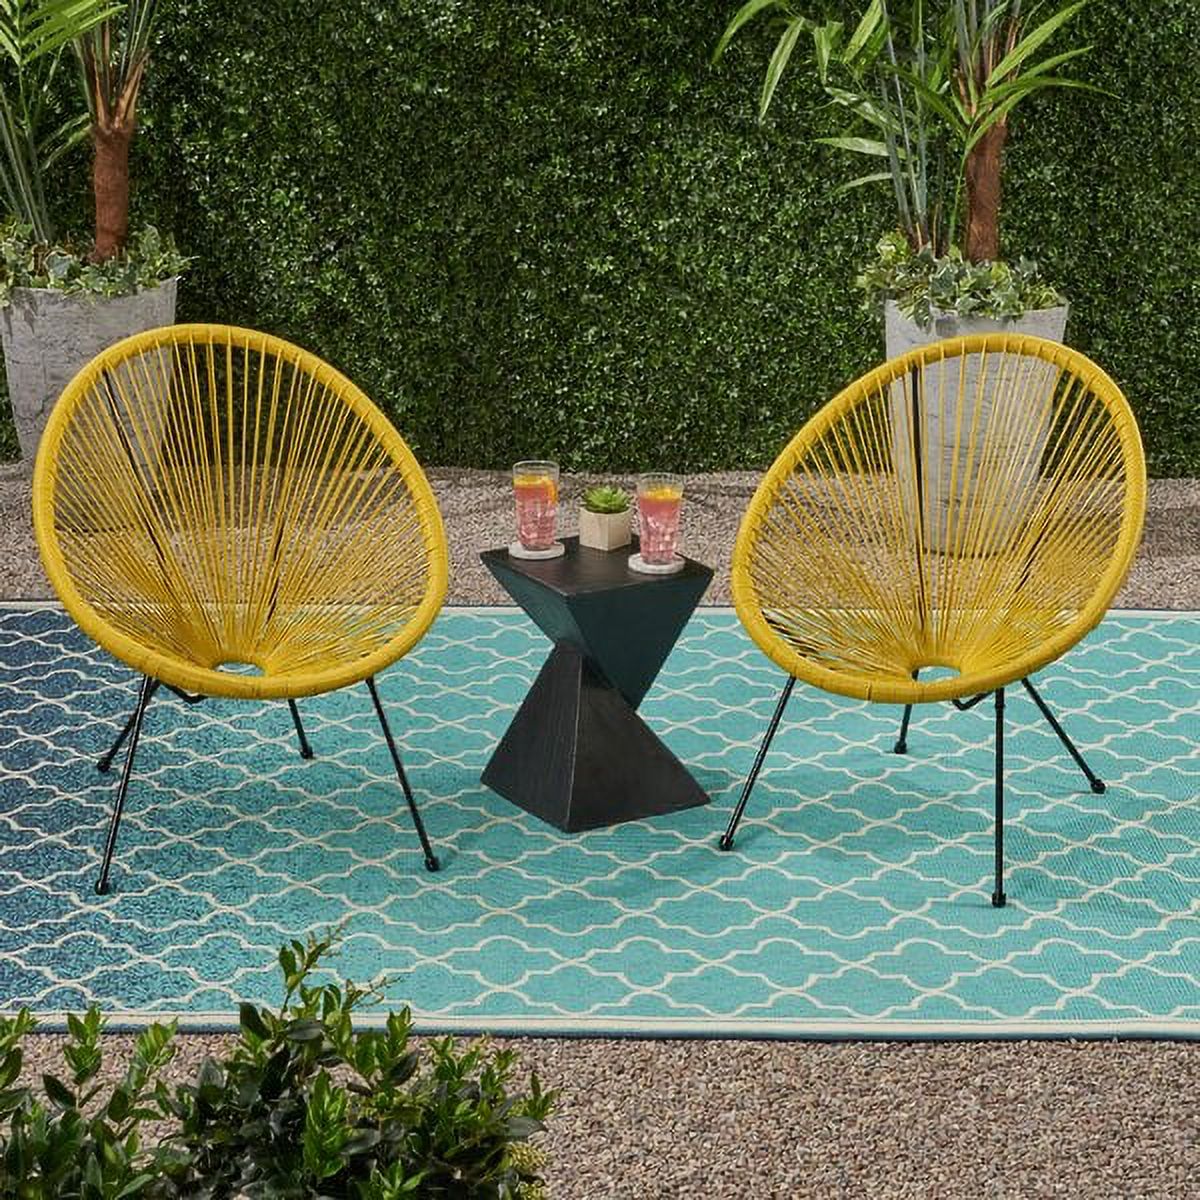 Kevinplus Outdoor Hammock Weave Chair with Steel Frame, Patio Chair Set of 2 Weave Lounge Chair Sun Oval Chair Indoor Outdoor Chairs - image 1 of 4